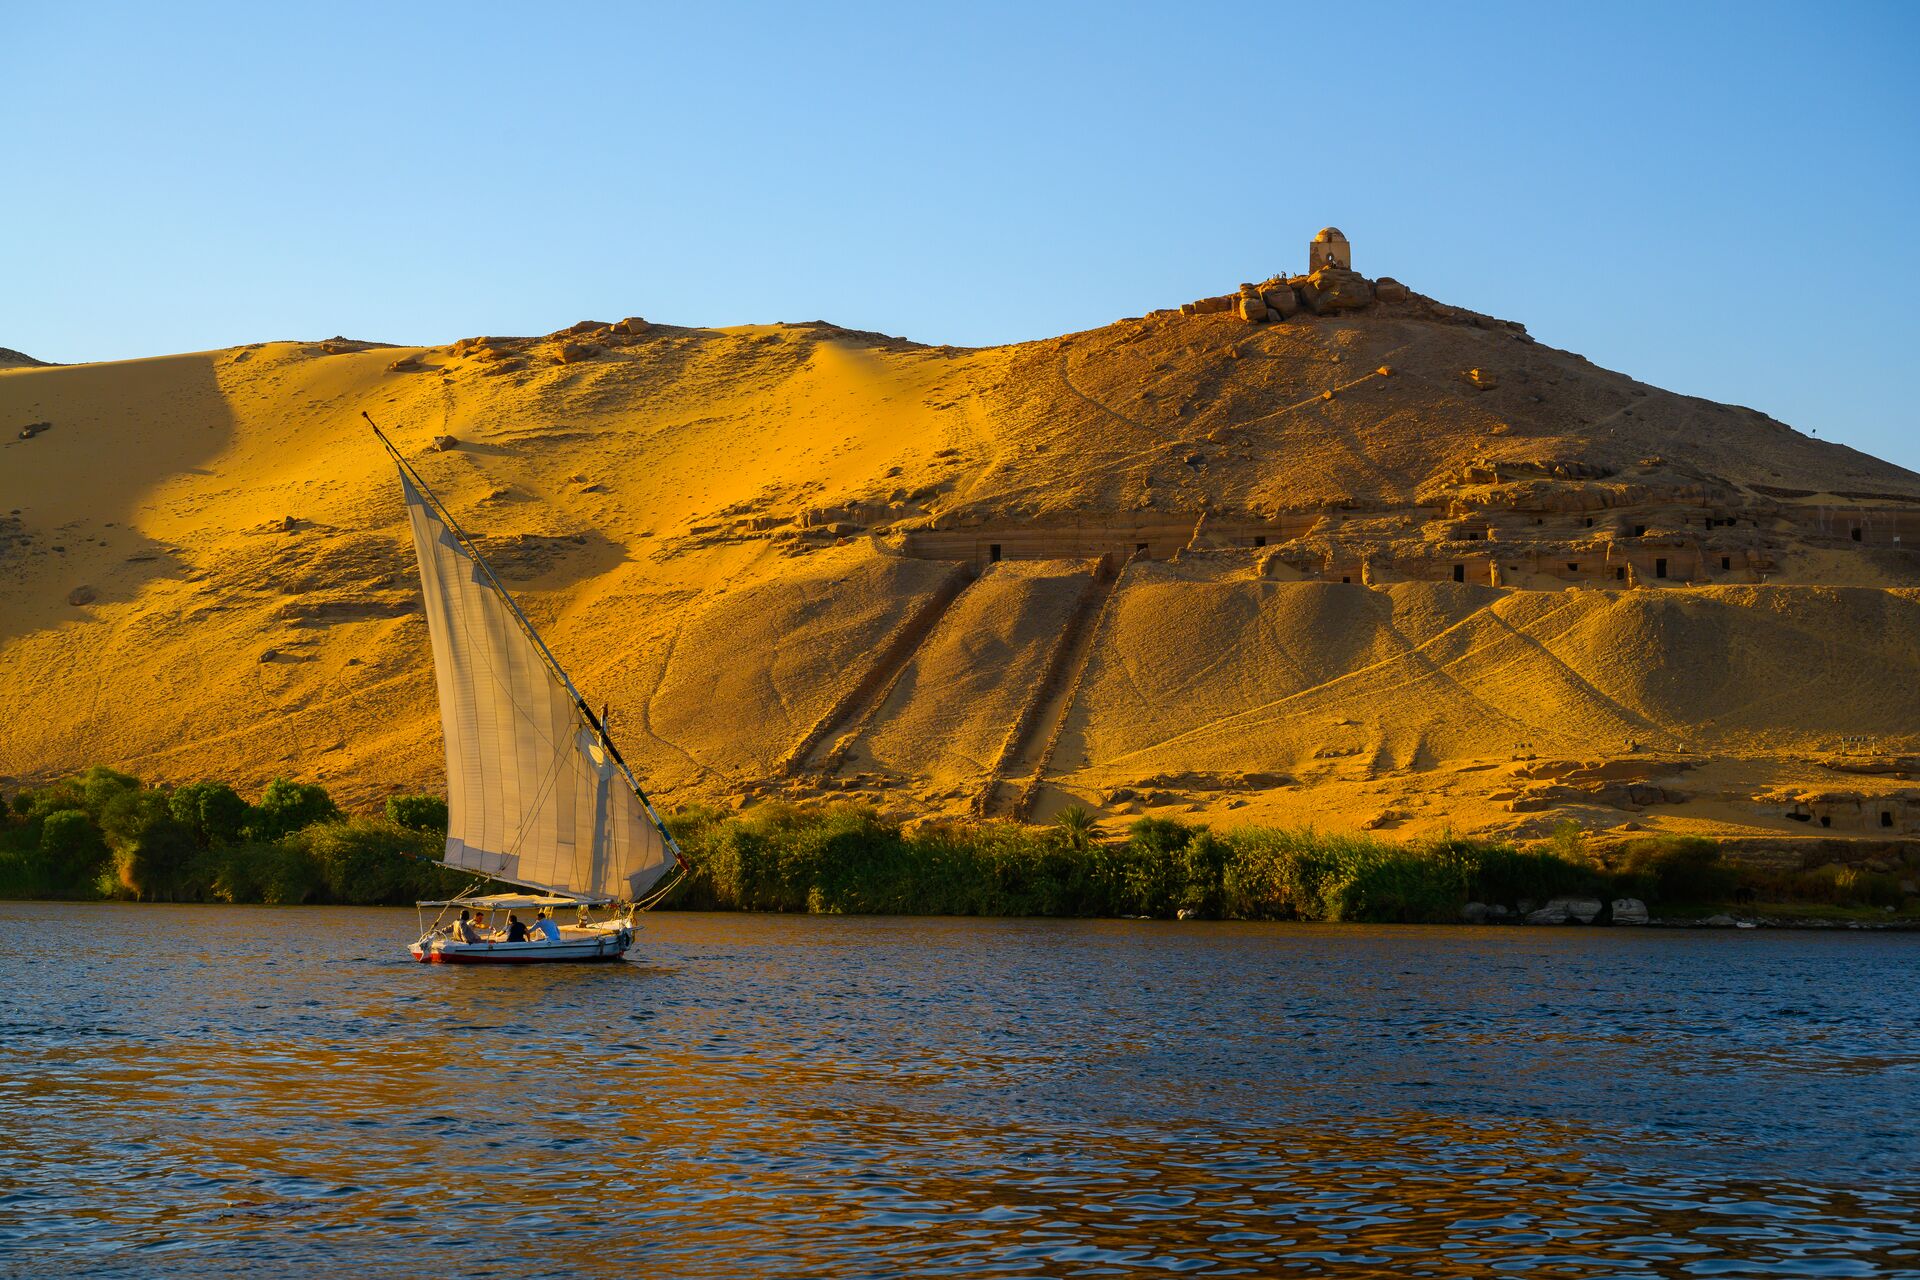 Image of sunset scene of boat on the river nile